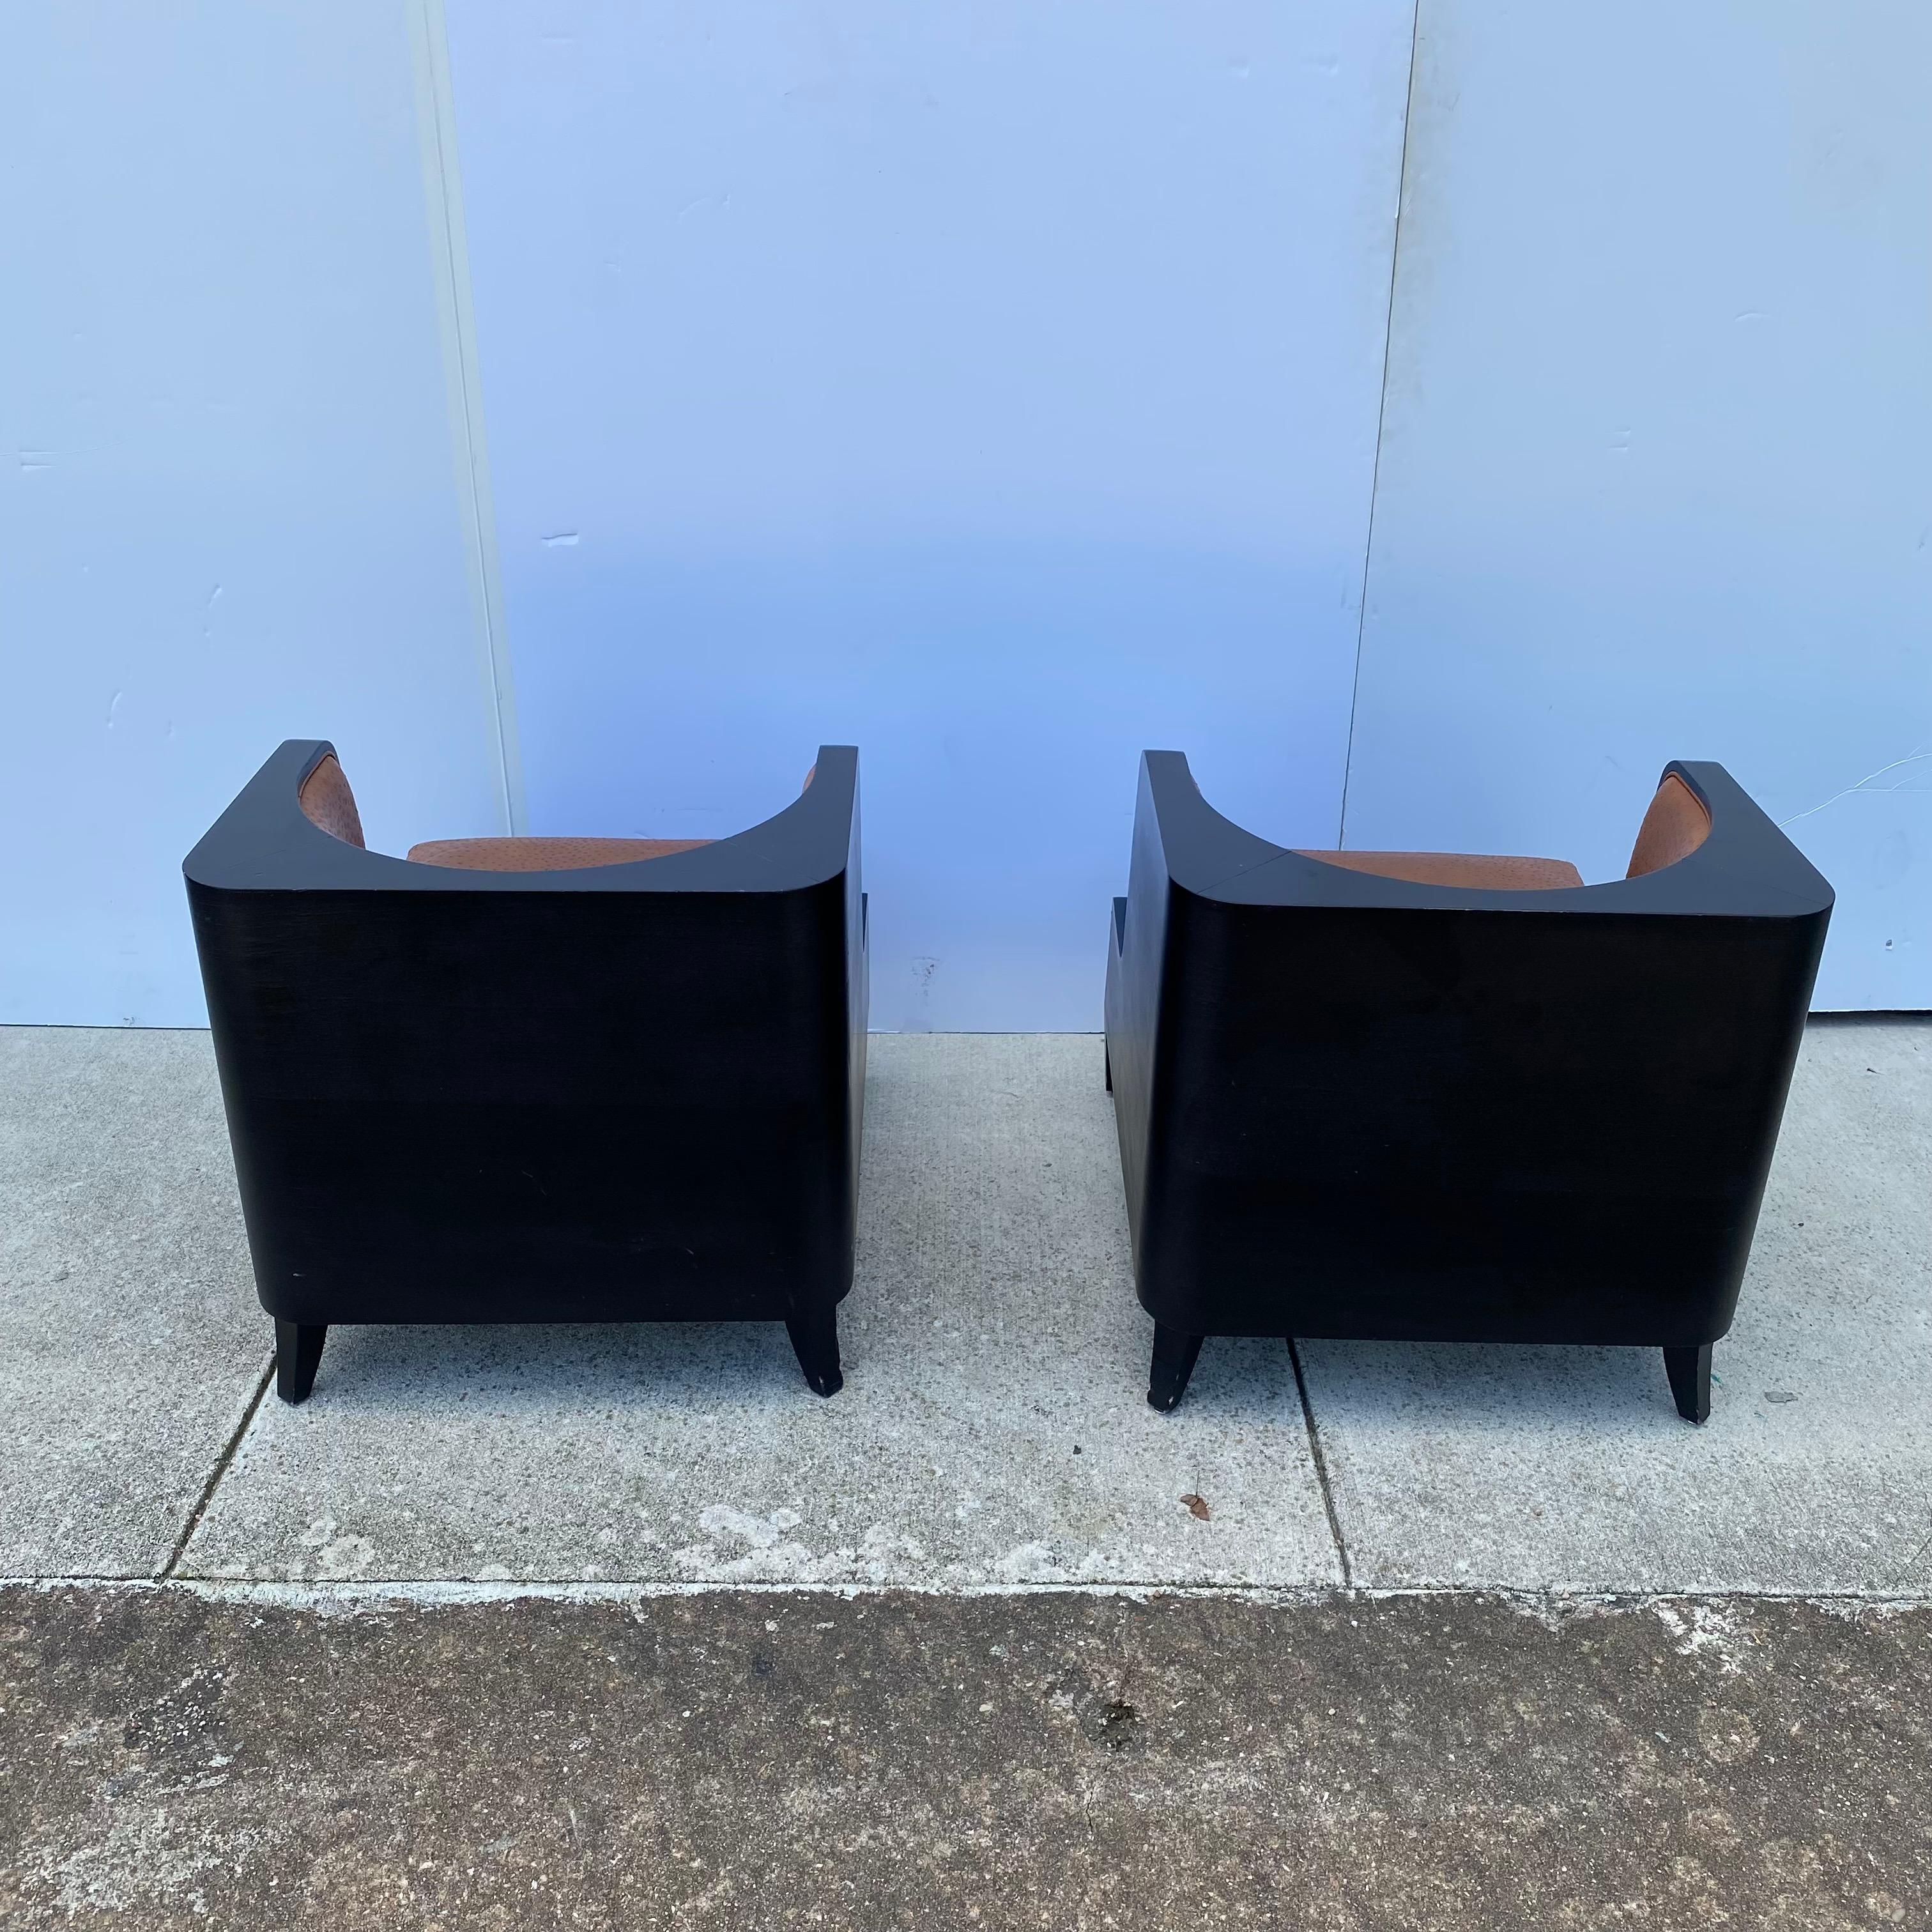 20th Century Pair of Art Deco Black Lacquered and Leather Chairs